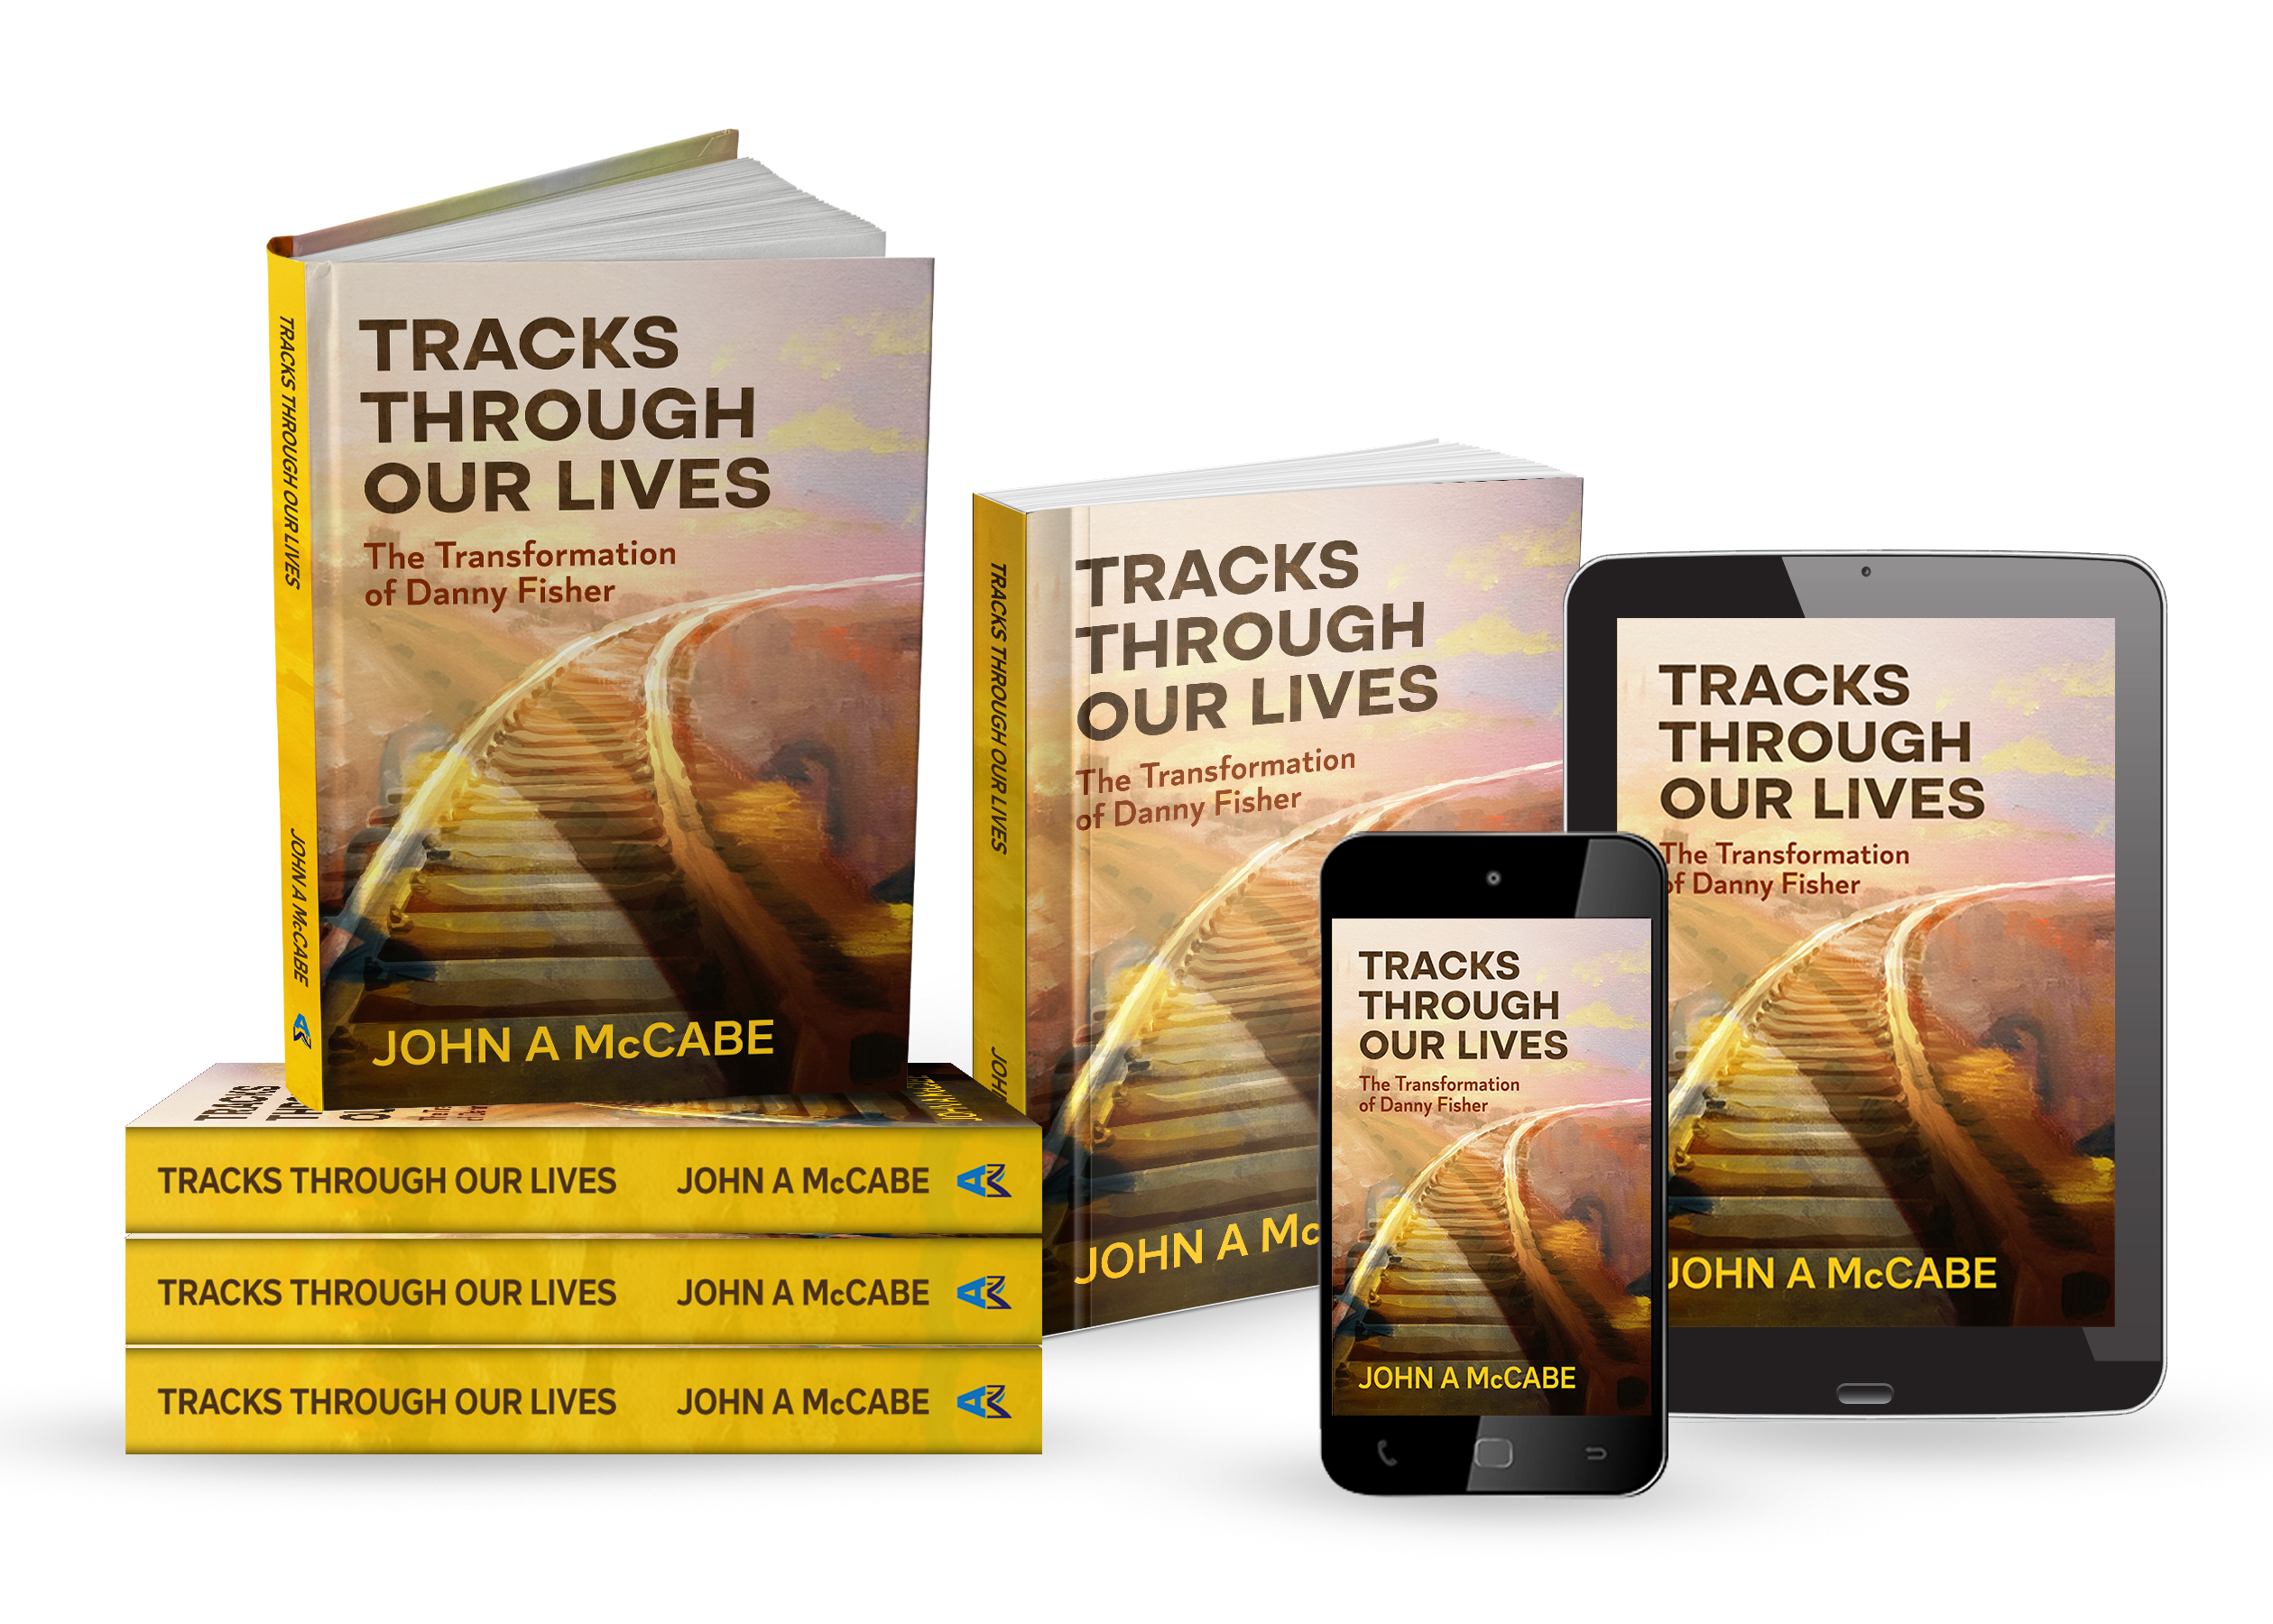 Octogenarian & Award-Winning Author, John A McCabe Releases Second Novel in 2022 - "Tracks Through Our Lives: the Transformation of Danny Fisher"